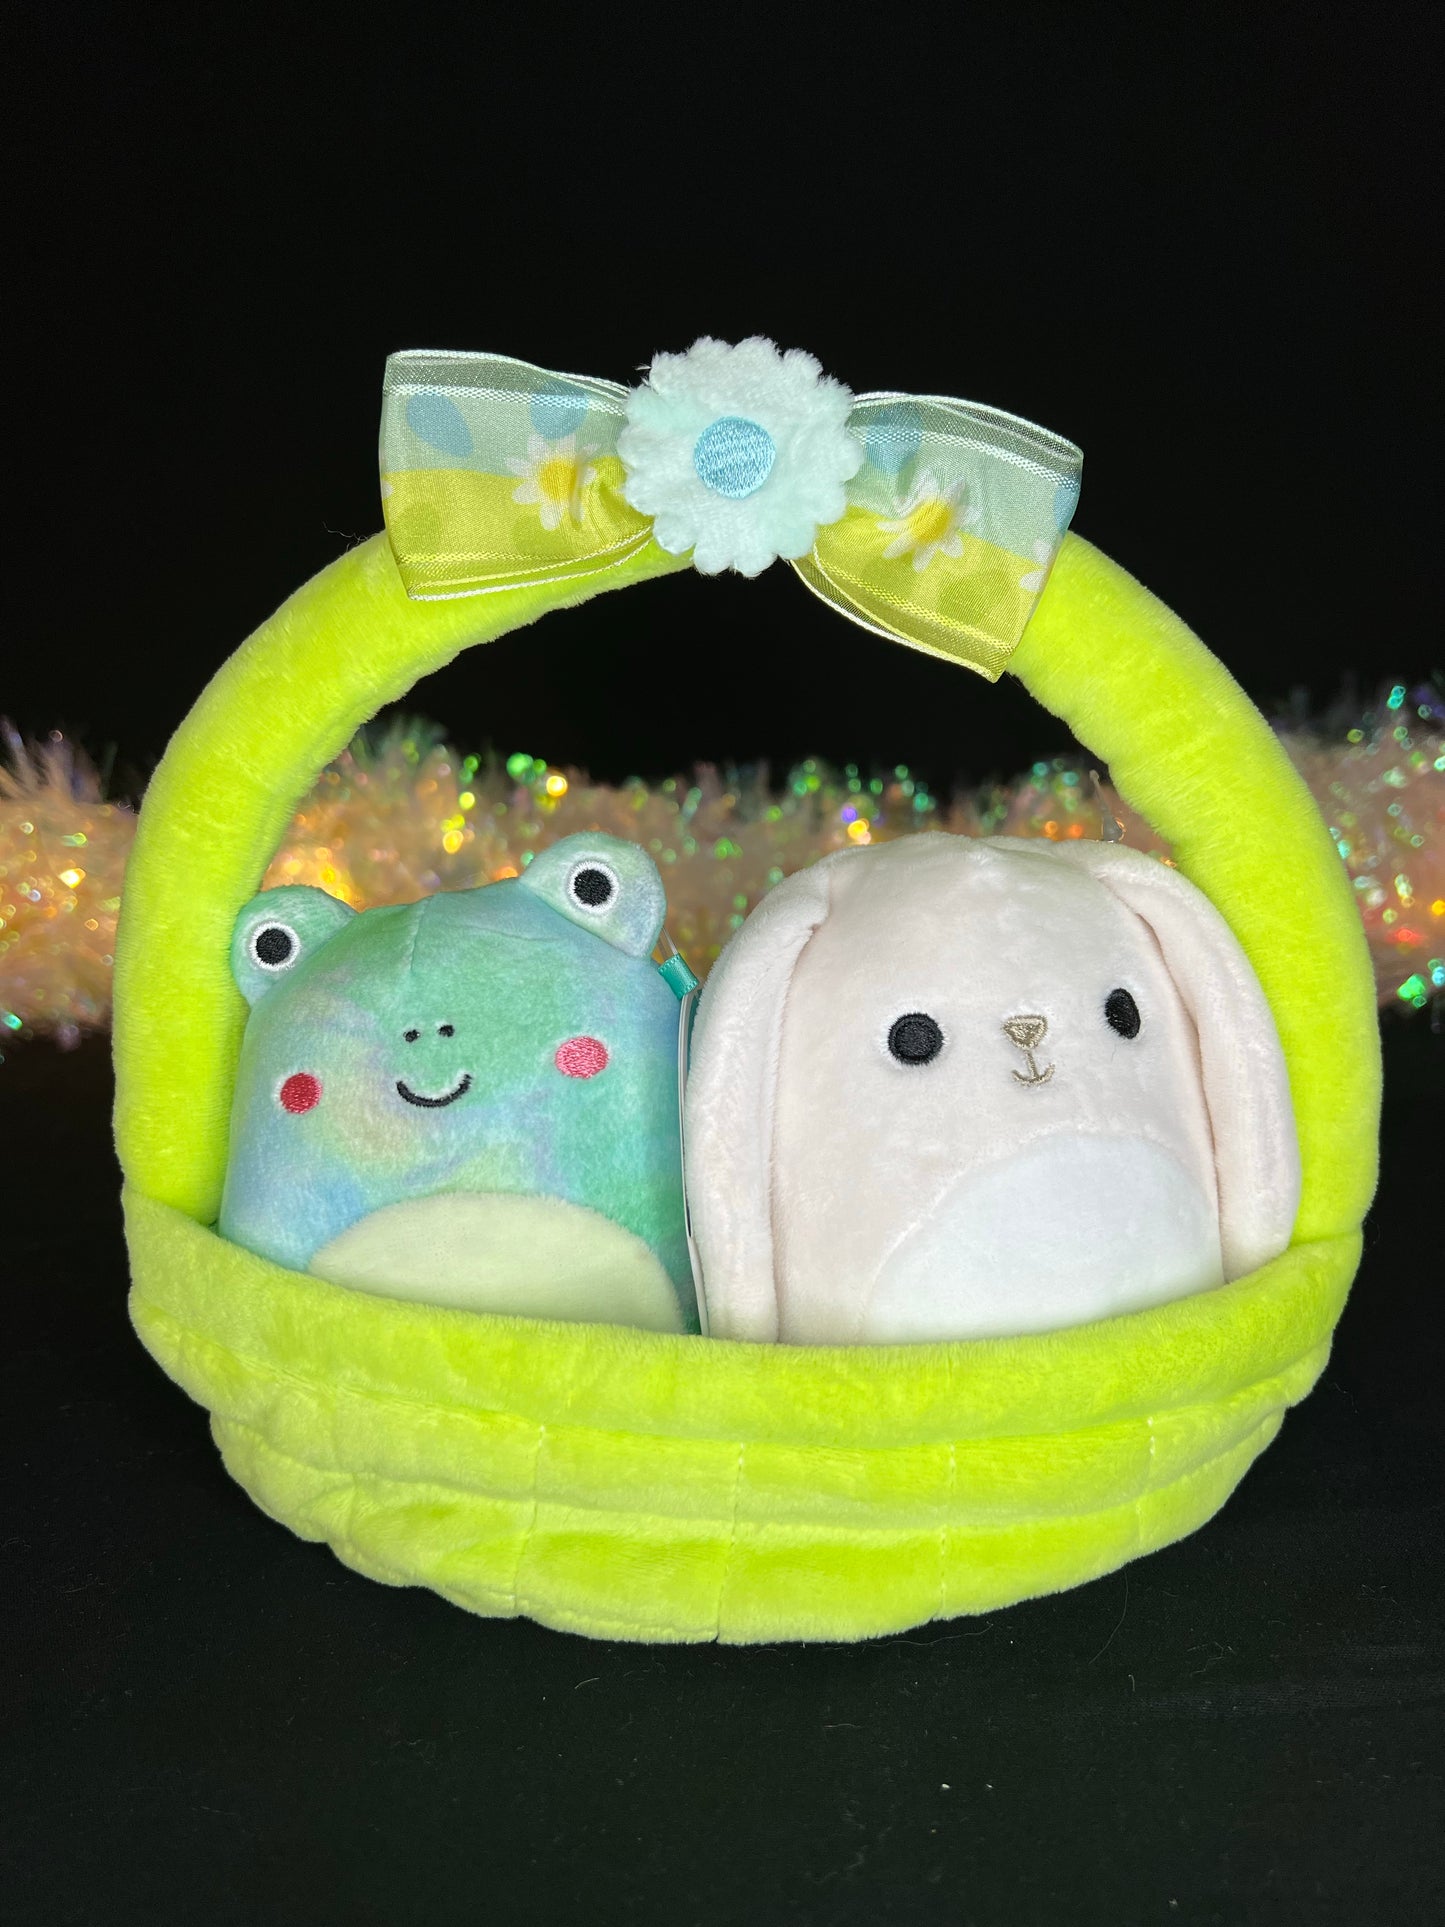 Squishmallow Easter Basket Ferdie the Frog and Valentina the Bunny.